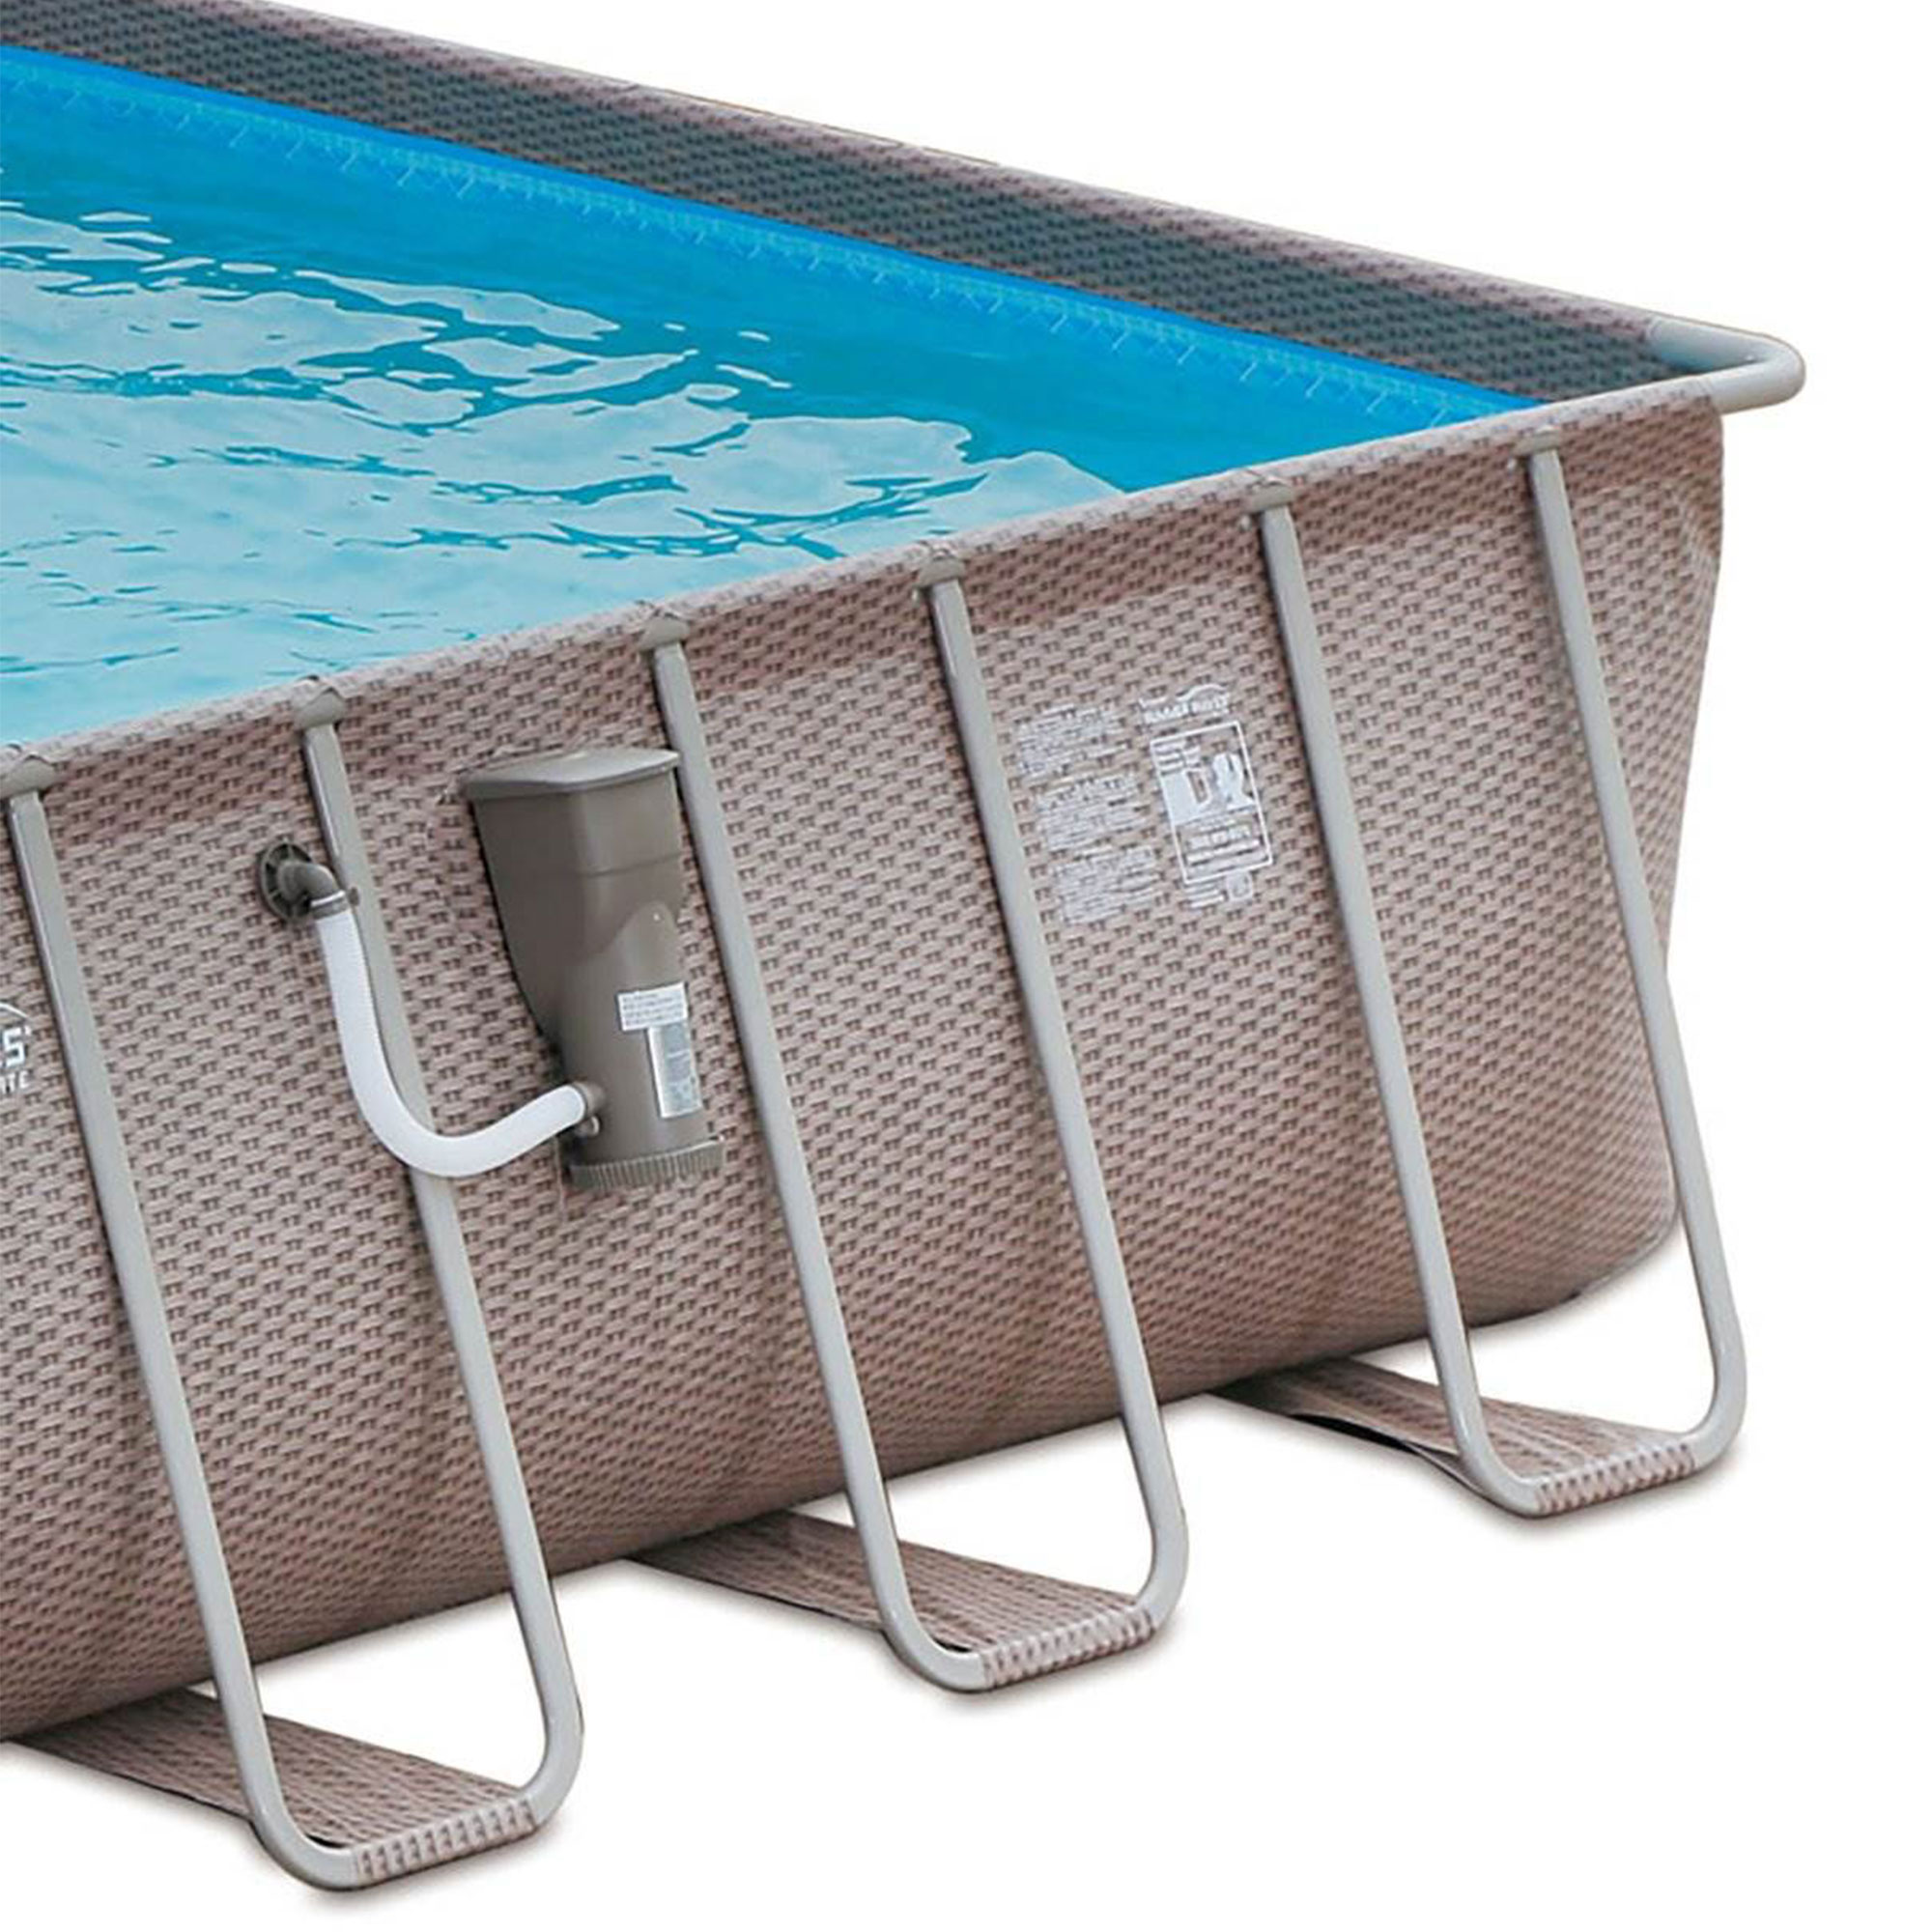 Summer Waves 24 x 12 x 4.5' Rectangle Above Ground Frame Swimming Pool Set - image 3 of 7